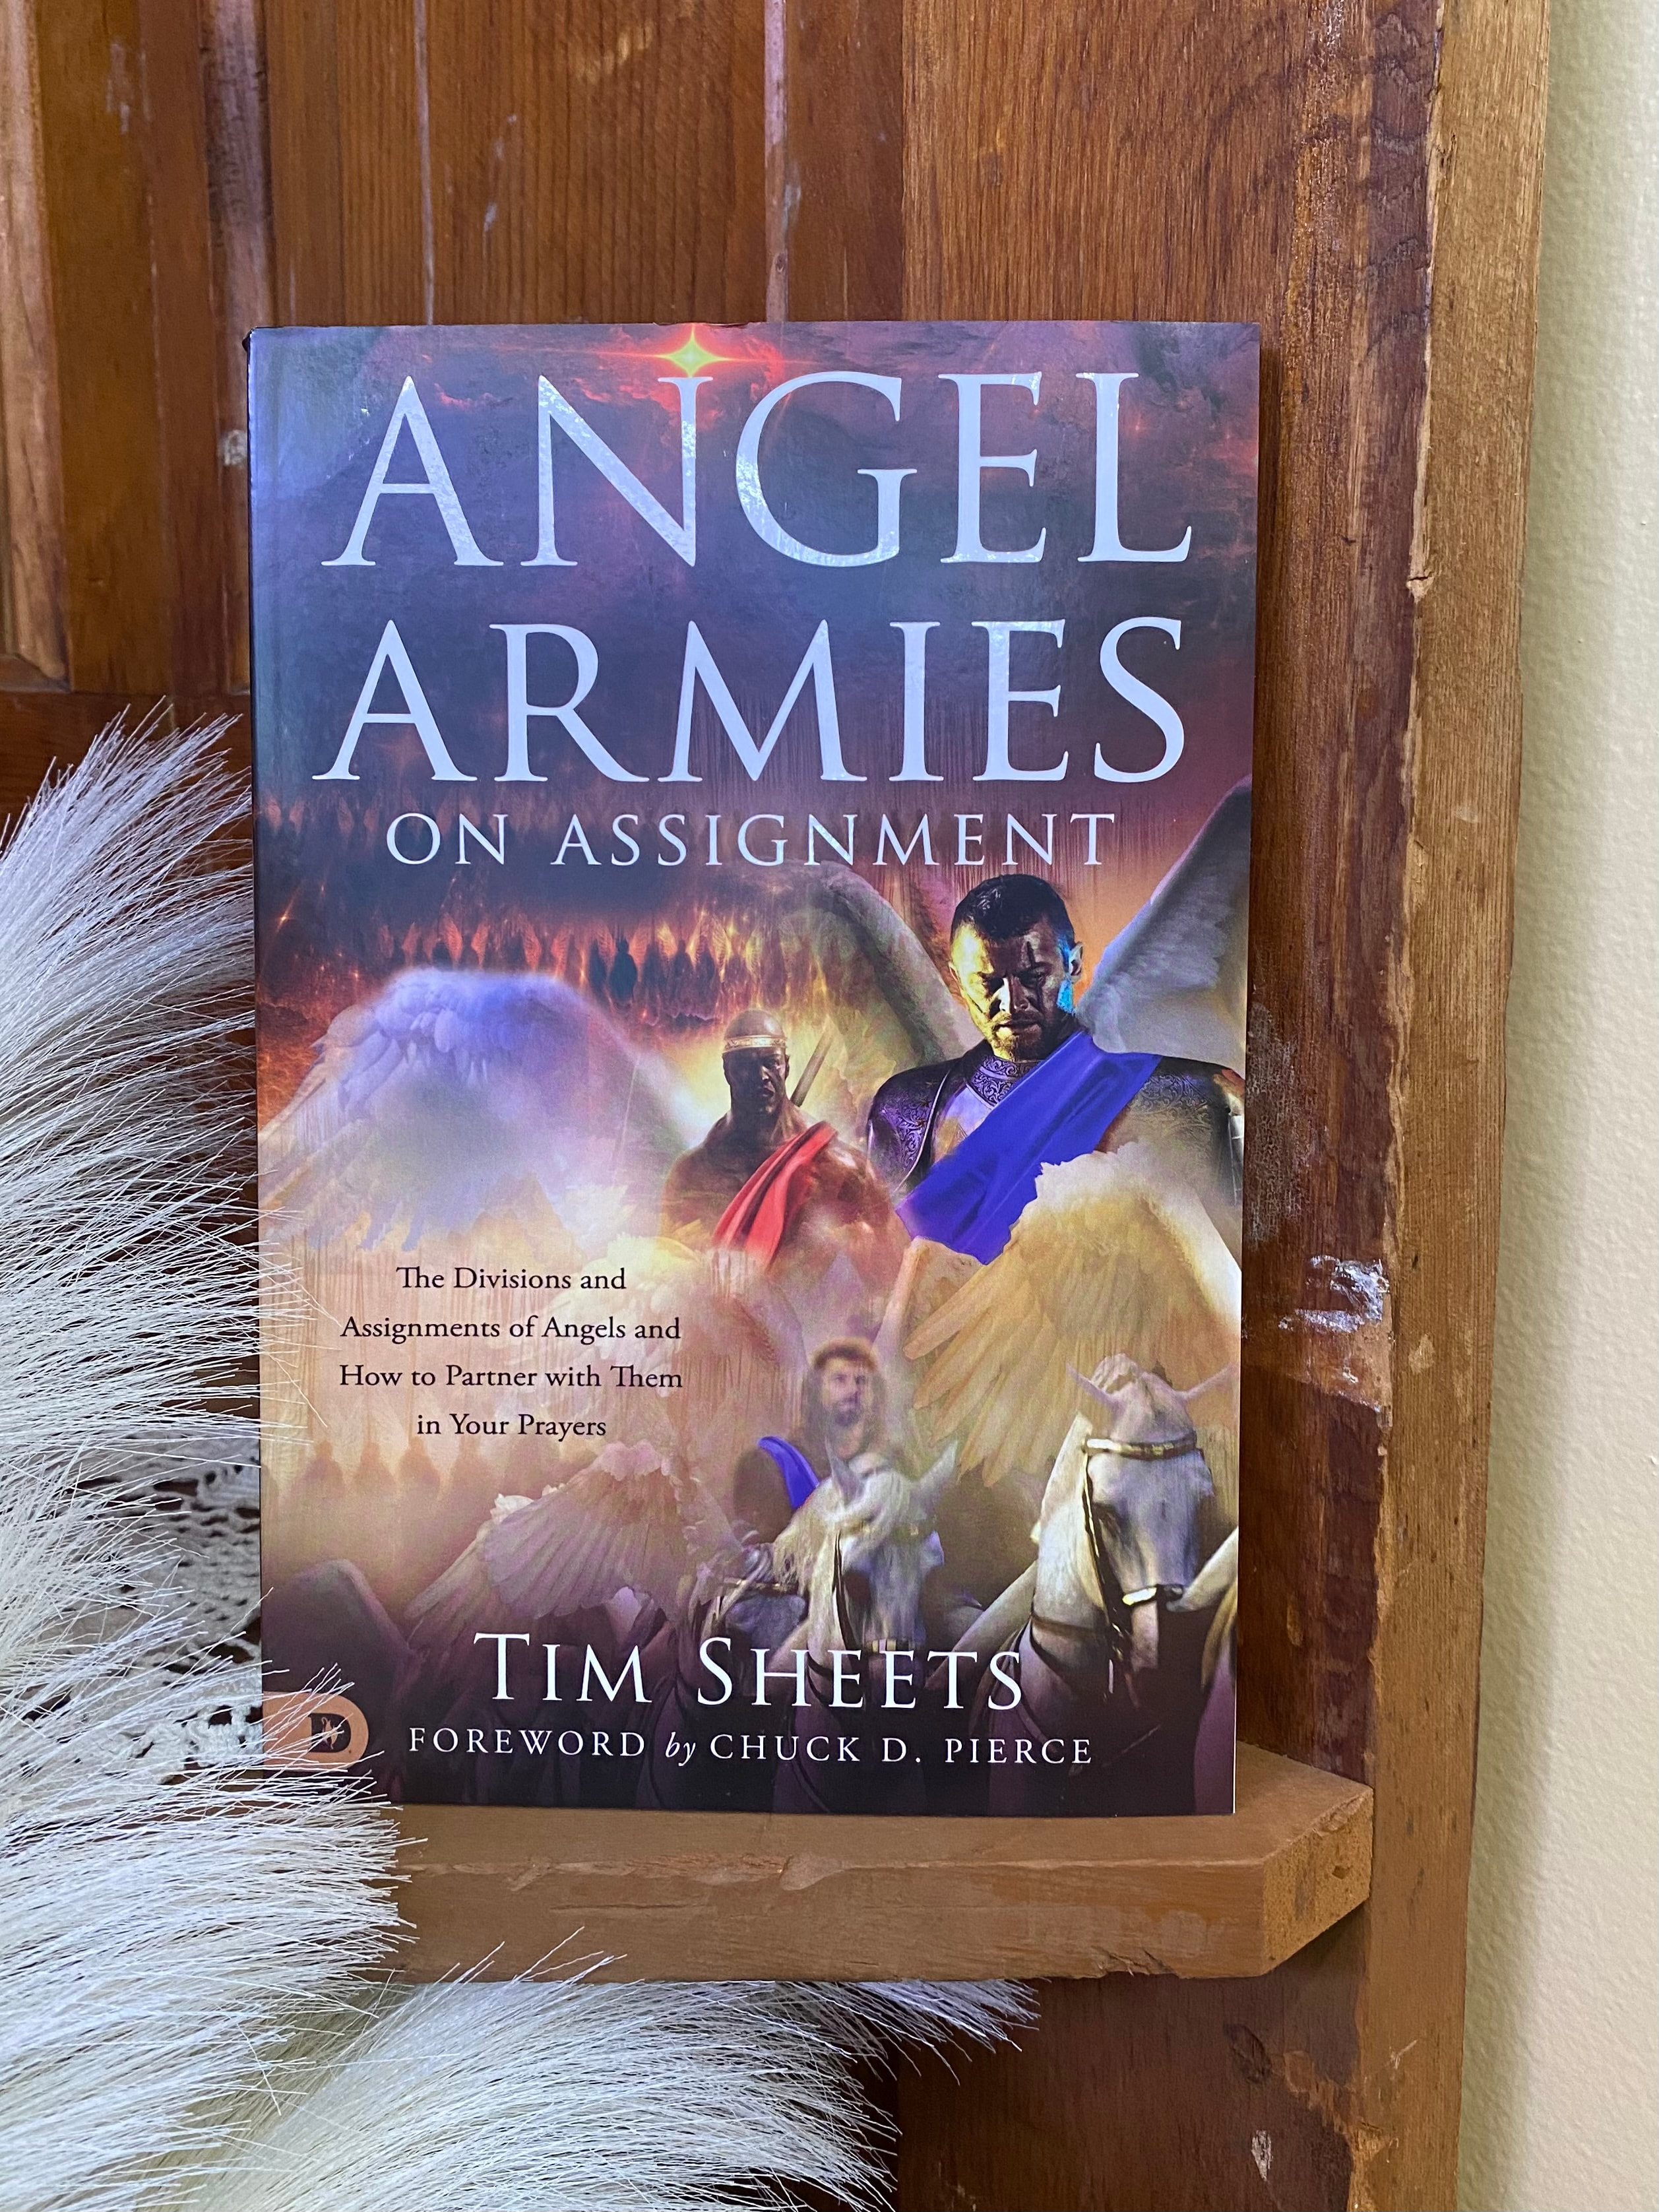 the assignment of angels